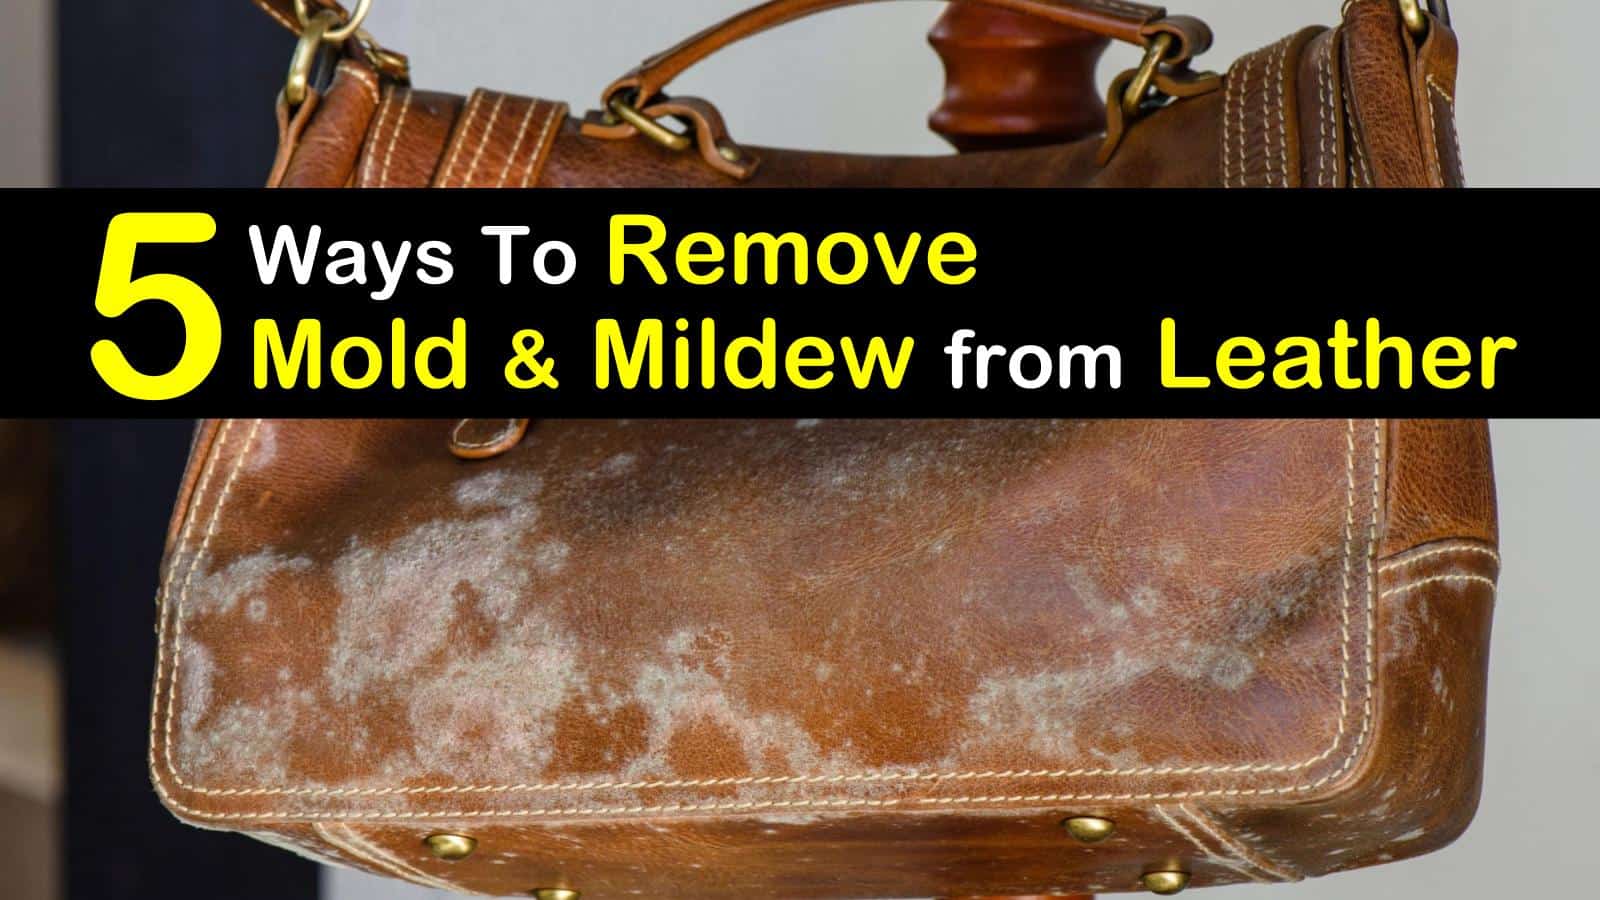 13 Quick & Easy Ways to Remove Mold from Leather